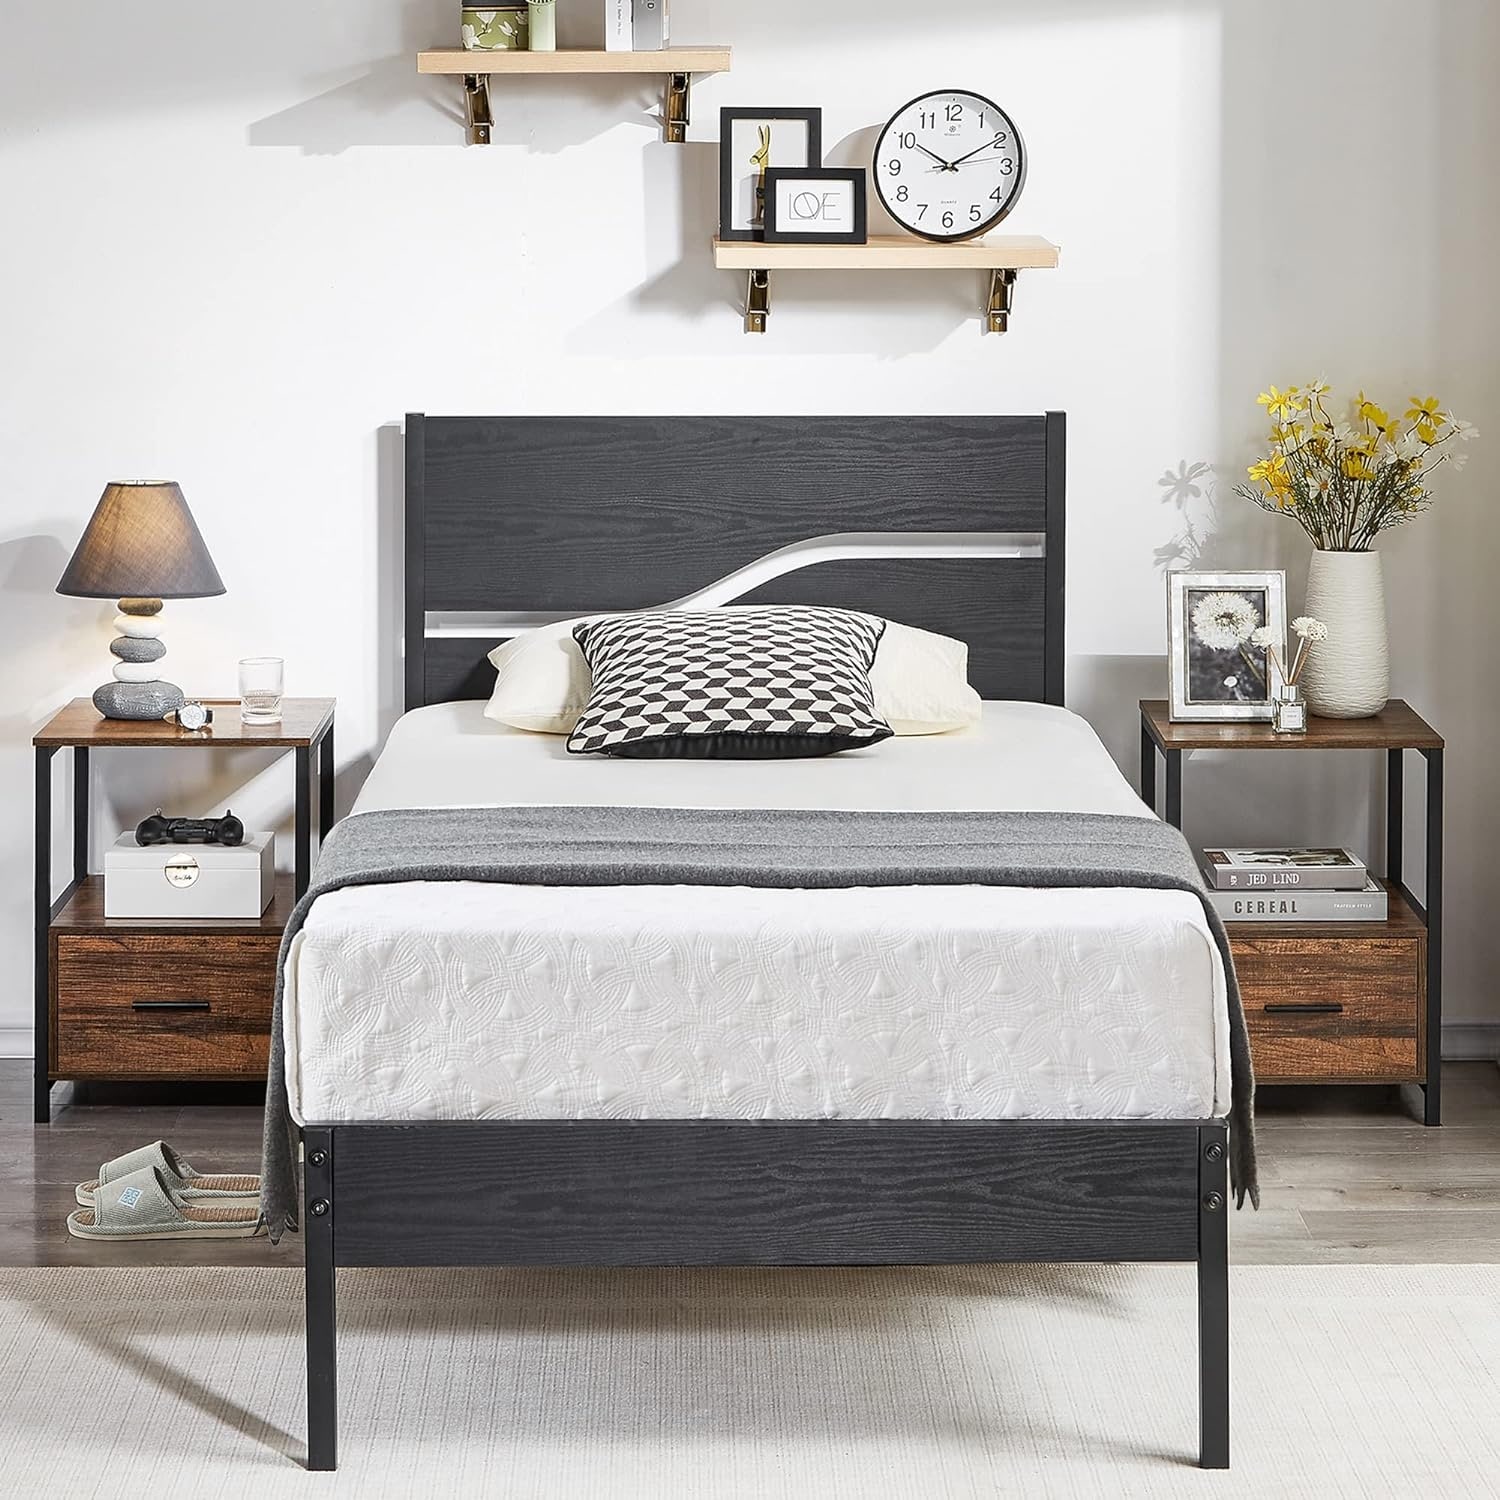 https://ak1.ostkcdn.com/images/products/is/images/direct/68a7b4e4d9f55181daf57995d1c047e36aeb7604/VECELO-Queen-Size-Bed-Industrial-Platform-Bed-Frame-with-Wood-Headboard%2CEasy-Set-up.jpg